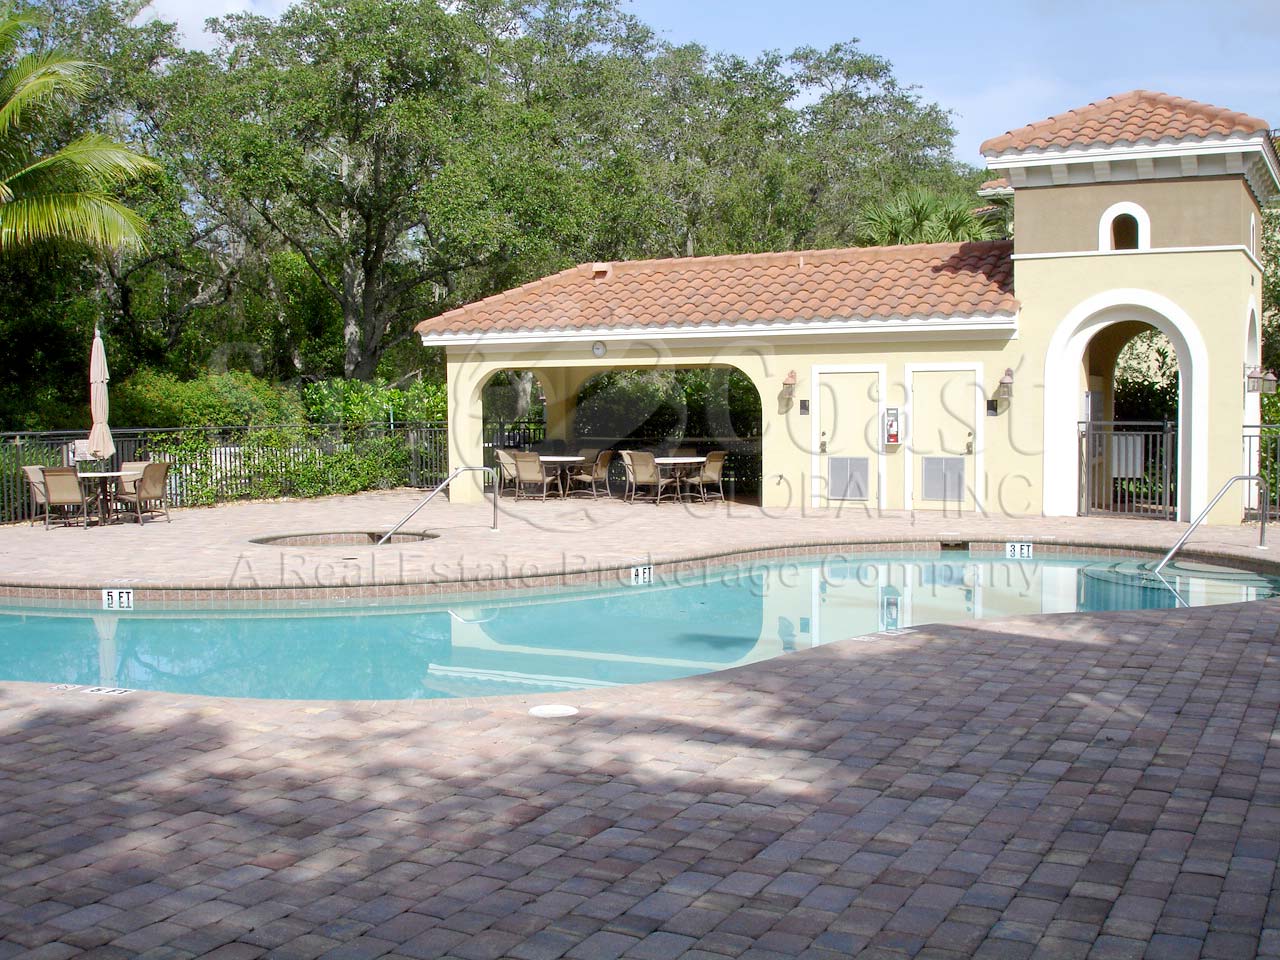 Calabria clubhouse, pool and spa